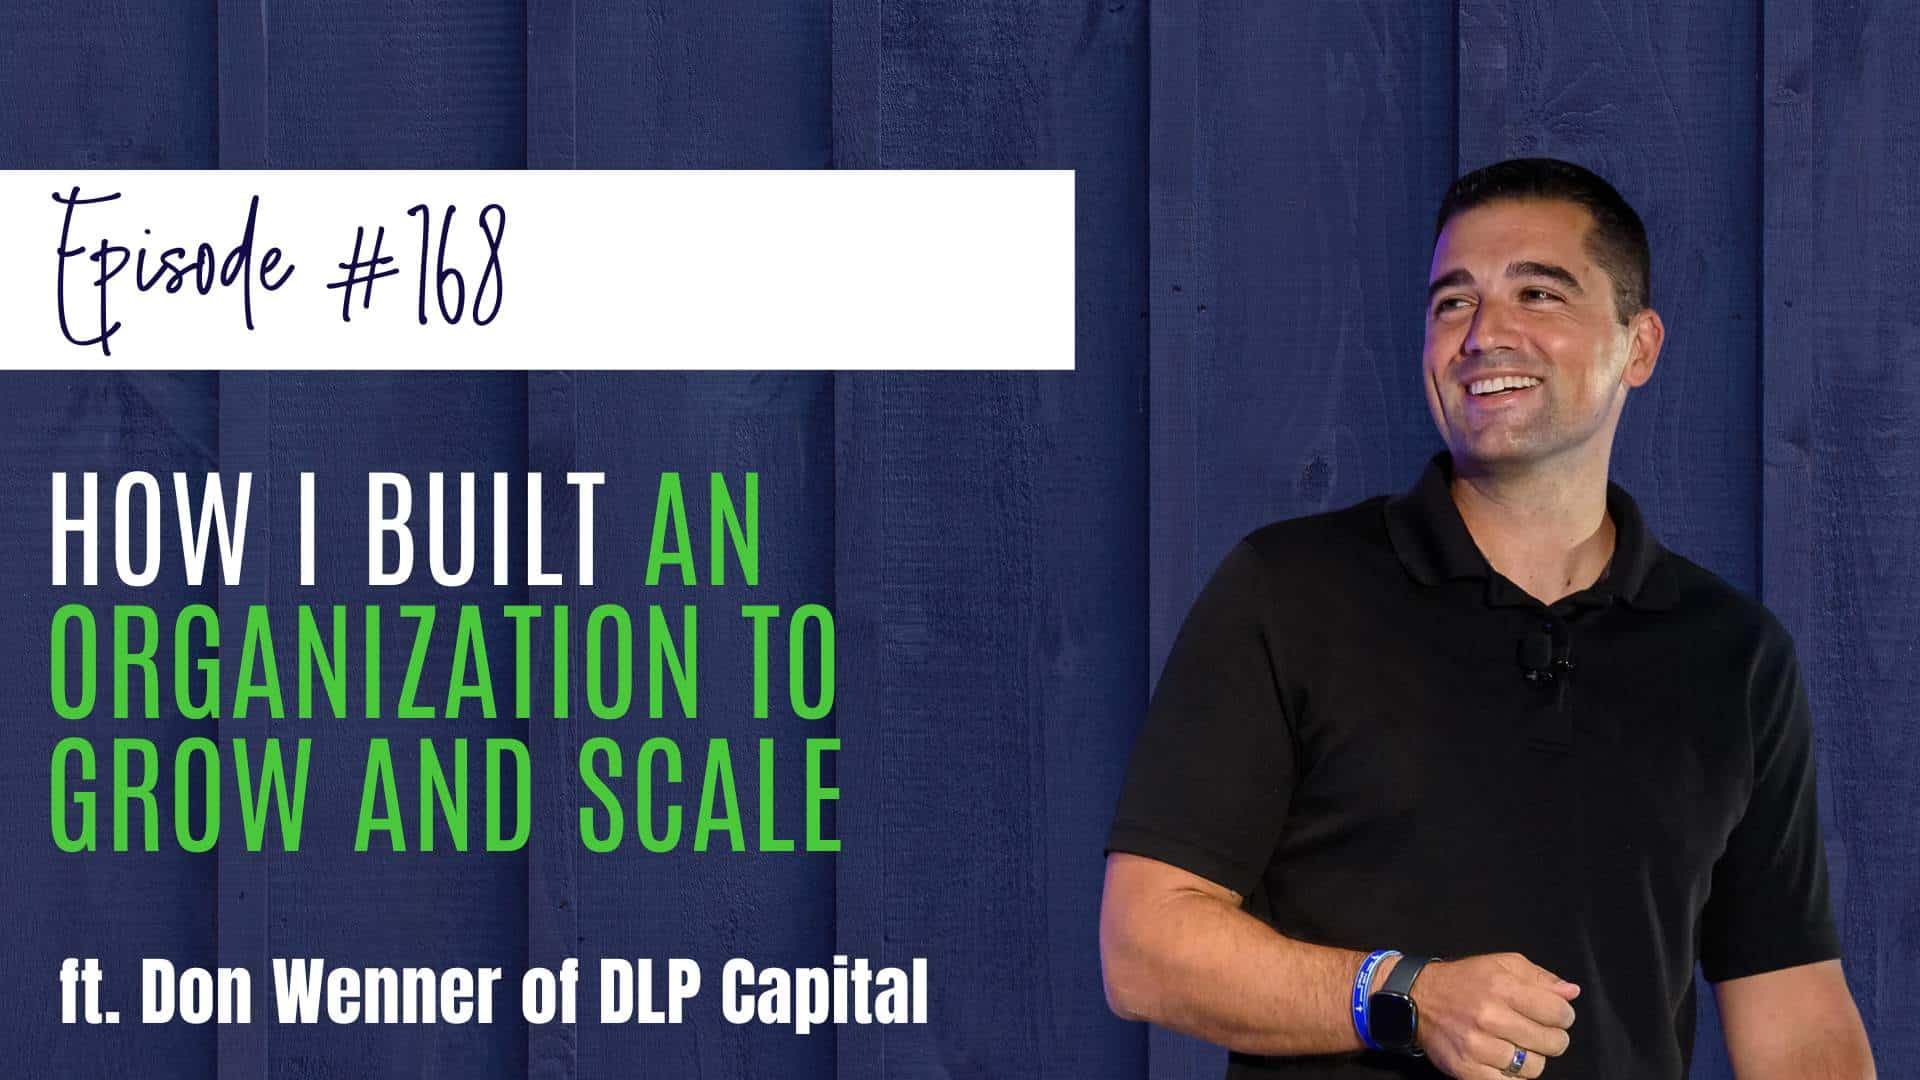 #168 How I Built an Organization to Grow and Scale, ft. Don Wenner of DLP Capital